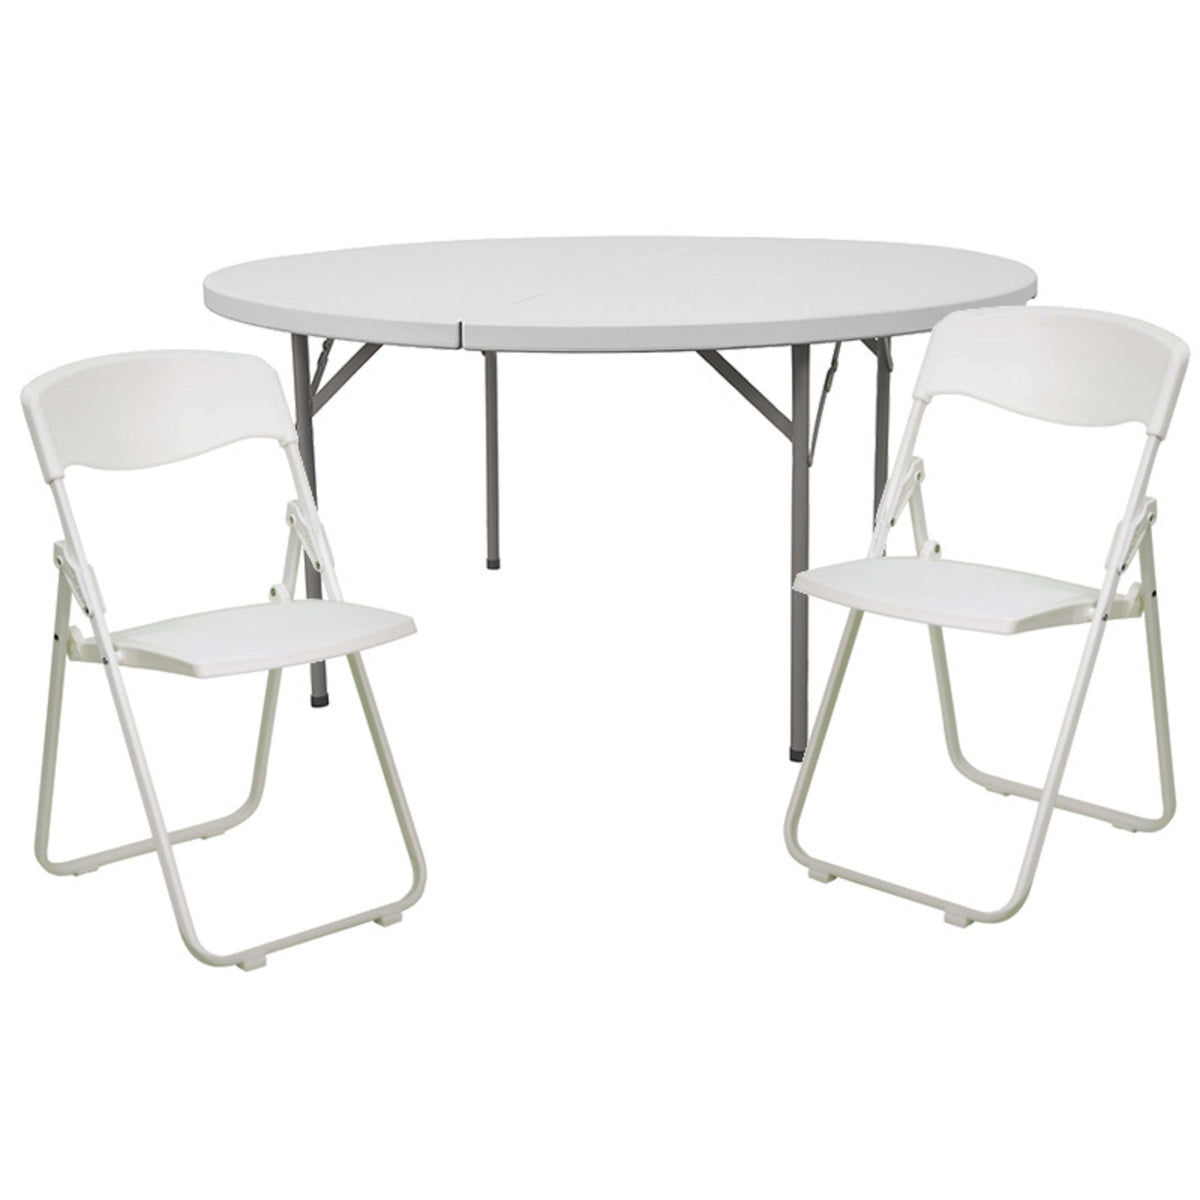 5-Foot Round Banquet and Event Folding Table Set with 8 Folding Chairs